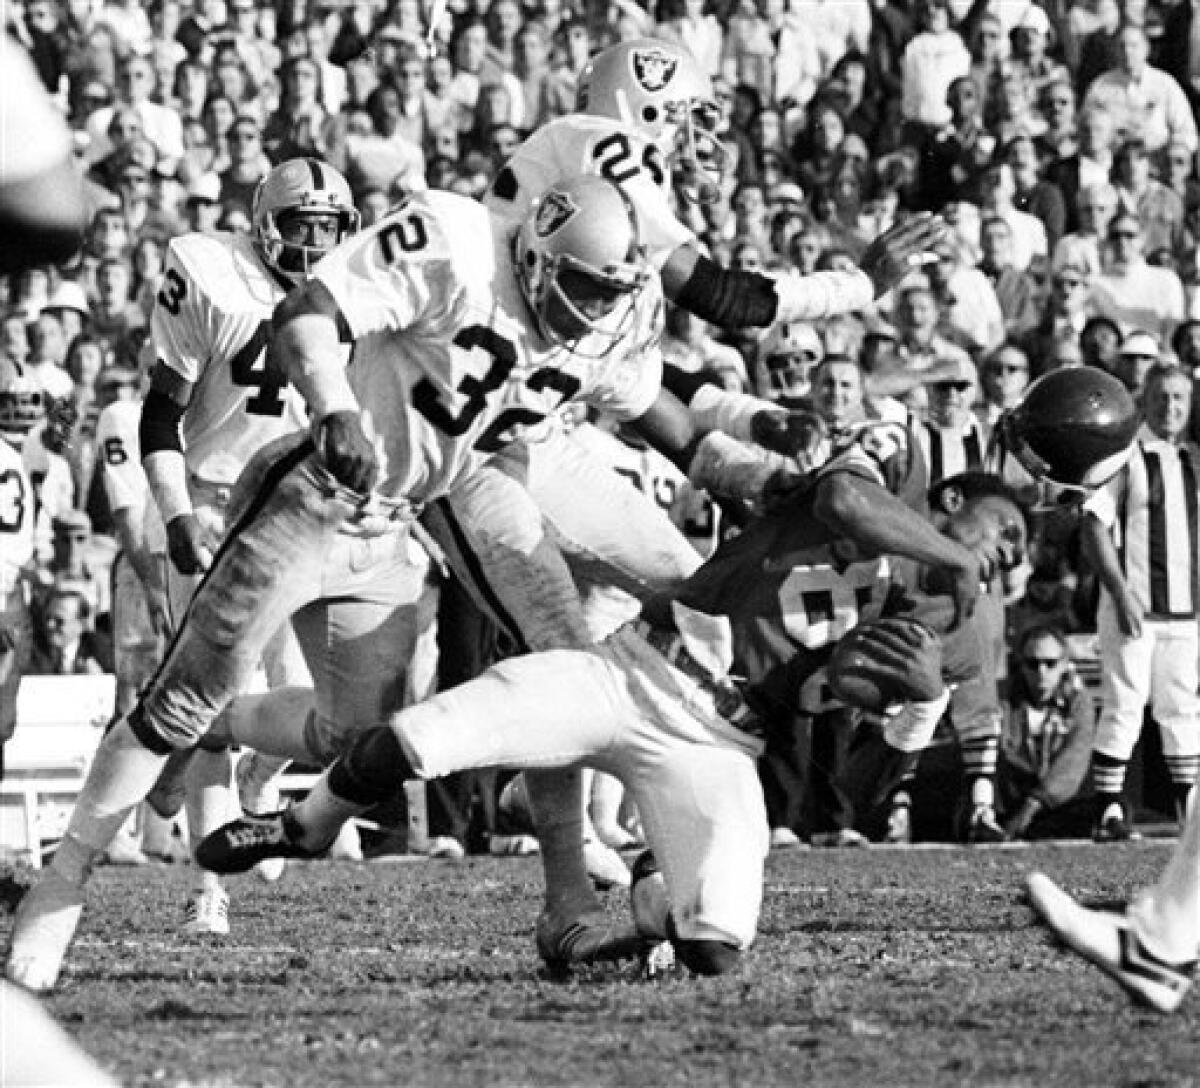 The Life And Career Of Jack Tatum (Complete Story)